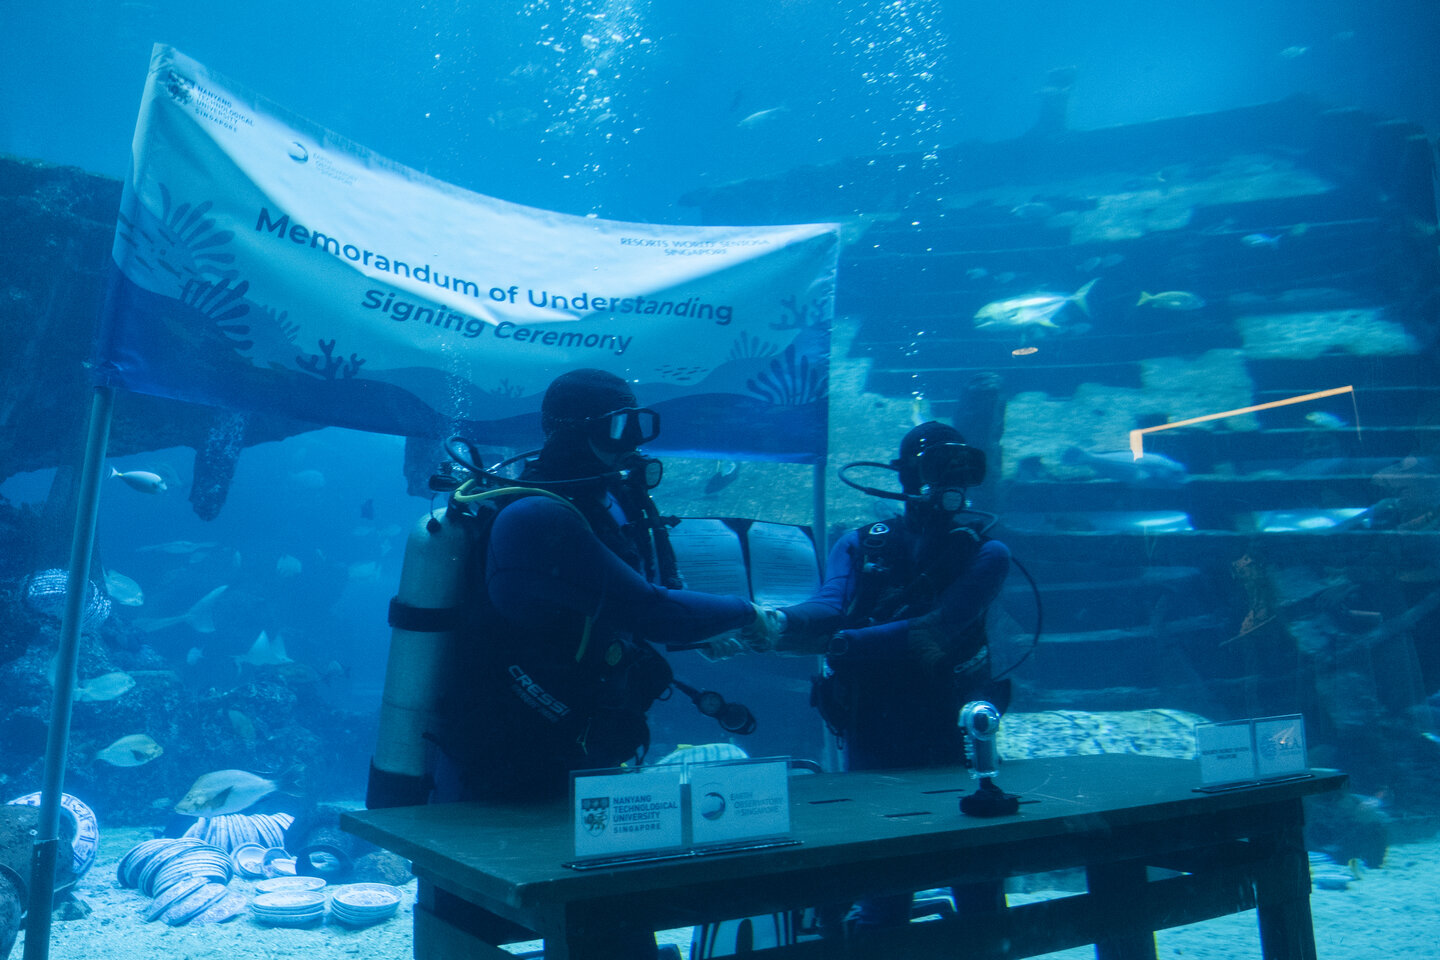 Assistant Professor Kyle Morgan from NTU's Asian School of the Environment and Abel Yeo from S.E.A. Aquarium's Education, Research and Conservation team signing the joint MOU underwater.